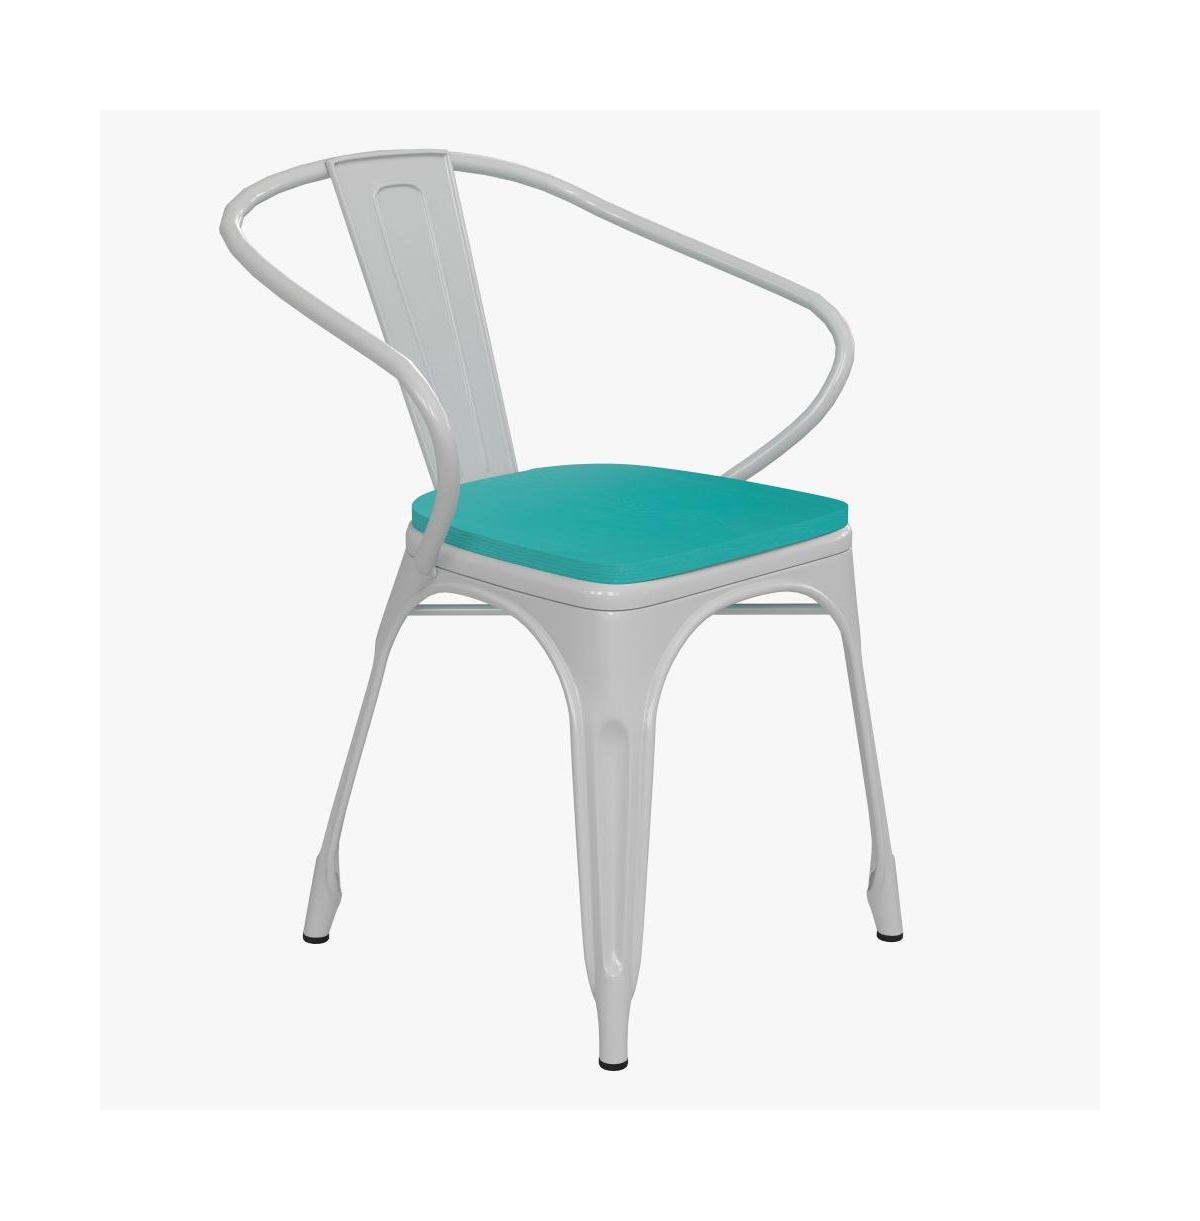 Emma+oliver Alva Metal Indoor-outdoor Stacking Chair With Vertical Slat Back, Arms And All-weather Polystyrene S In White,mint Green